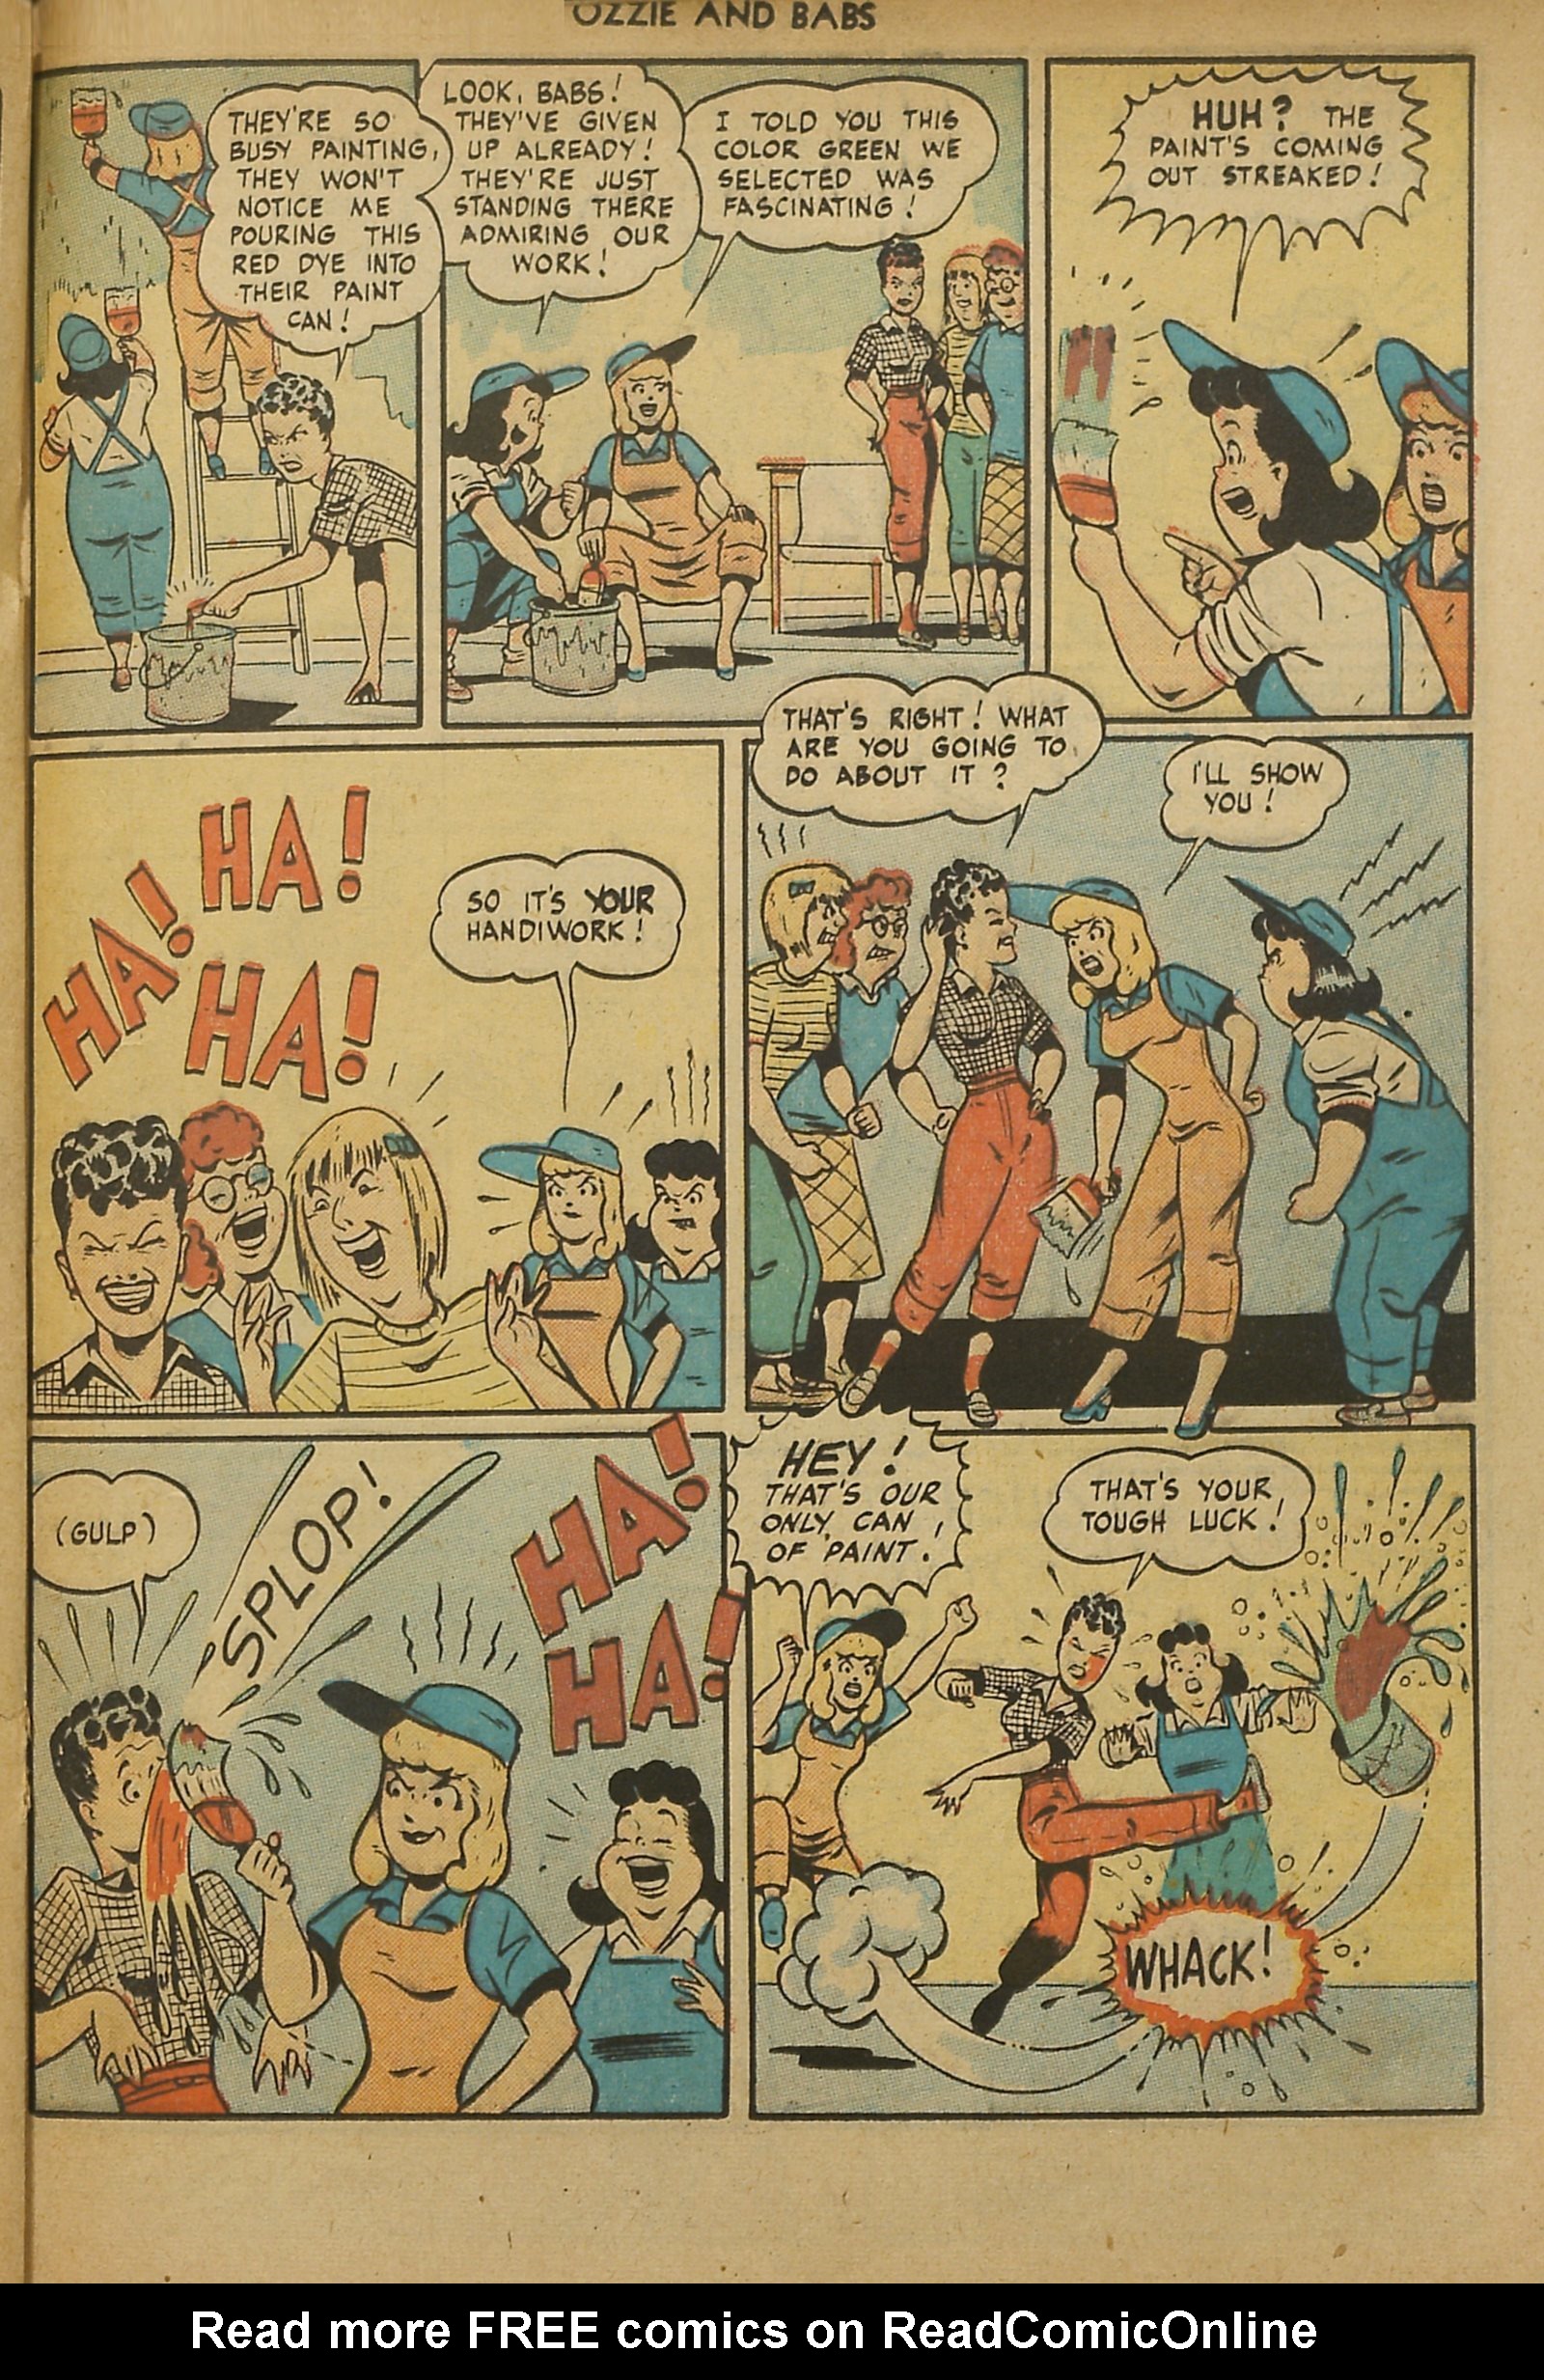 Read online Ozzie And Babs comic -  Issue #11 - 29